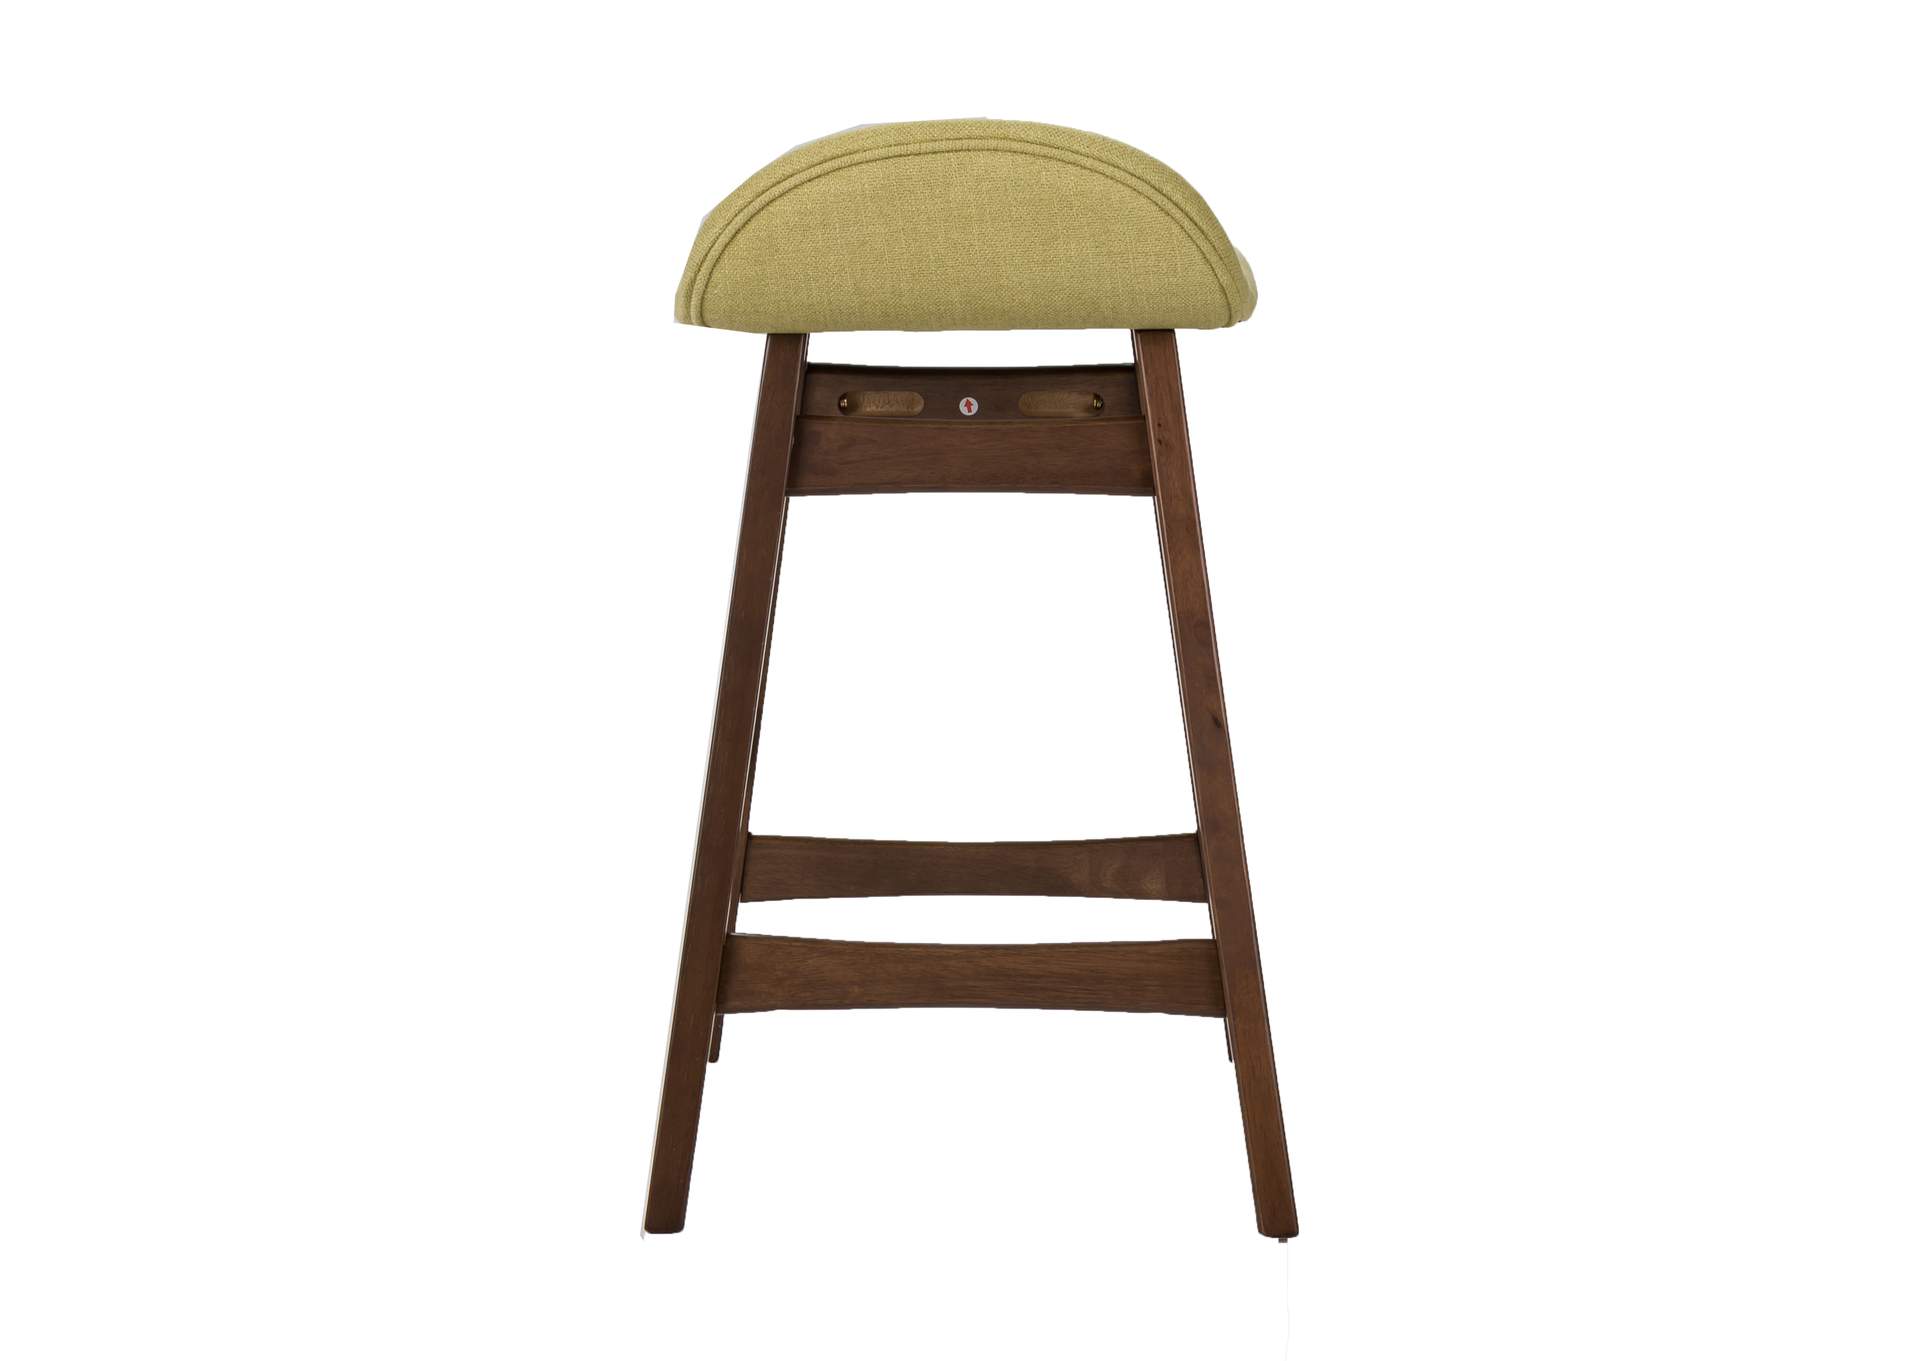 Space Savers 24 Inch Counter Chair - Green (RTA),Liberty